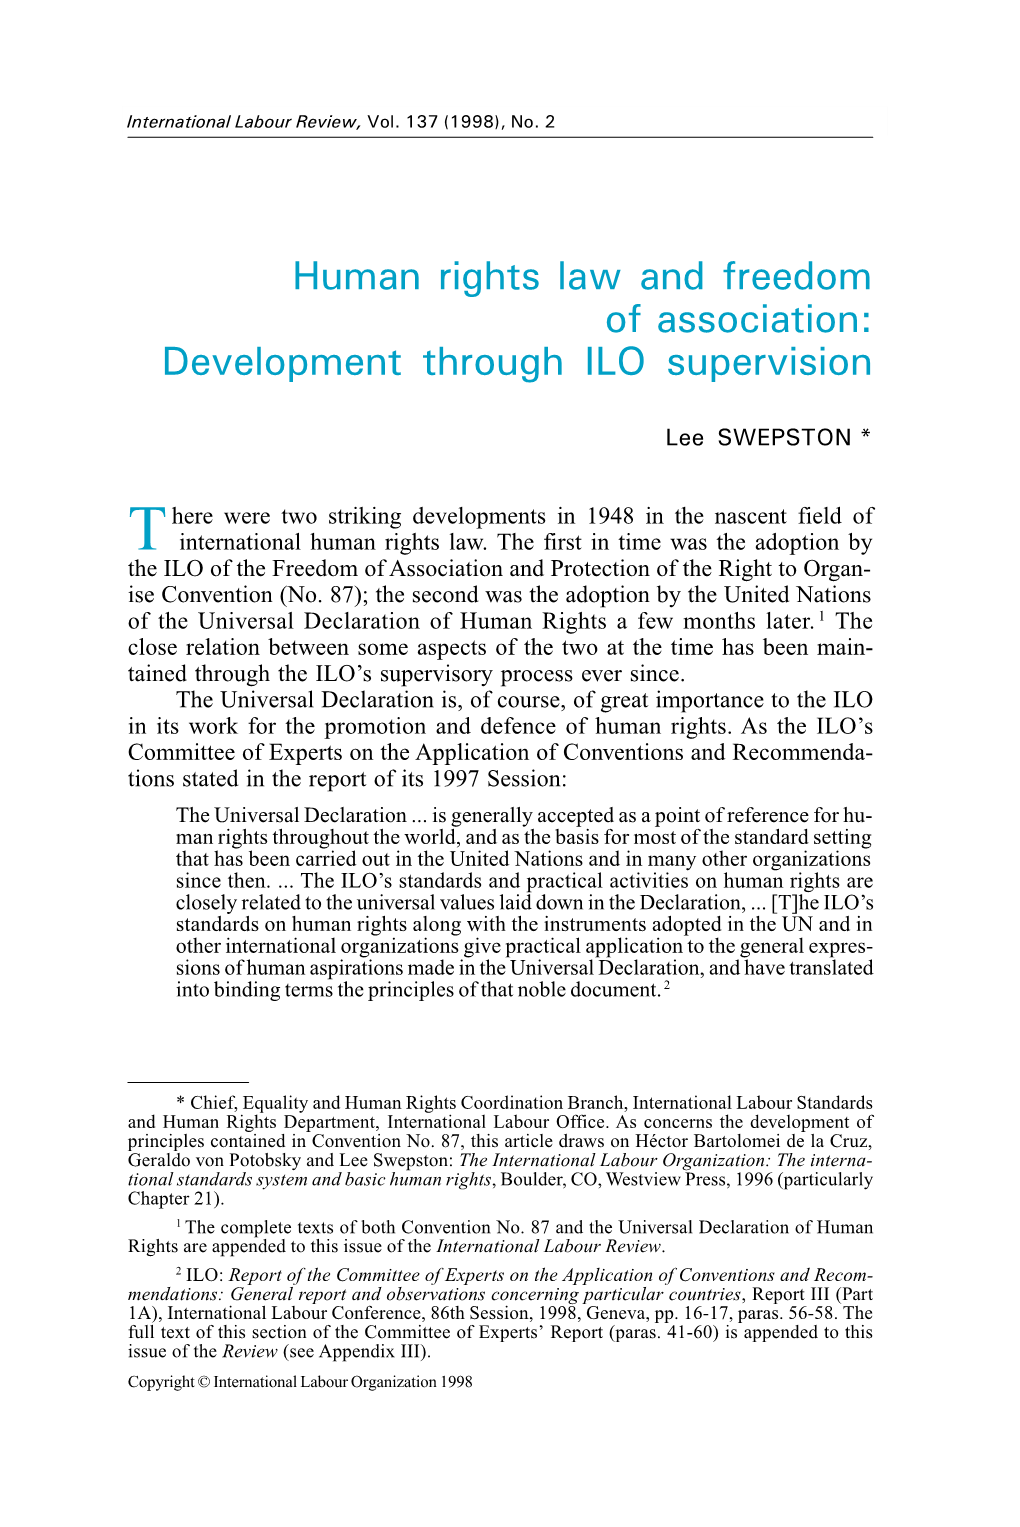 Human Rights Law and Freedom of Association: Development Through ILO Supervision